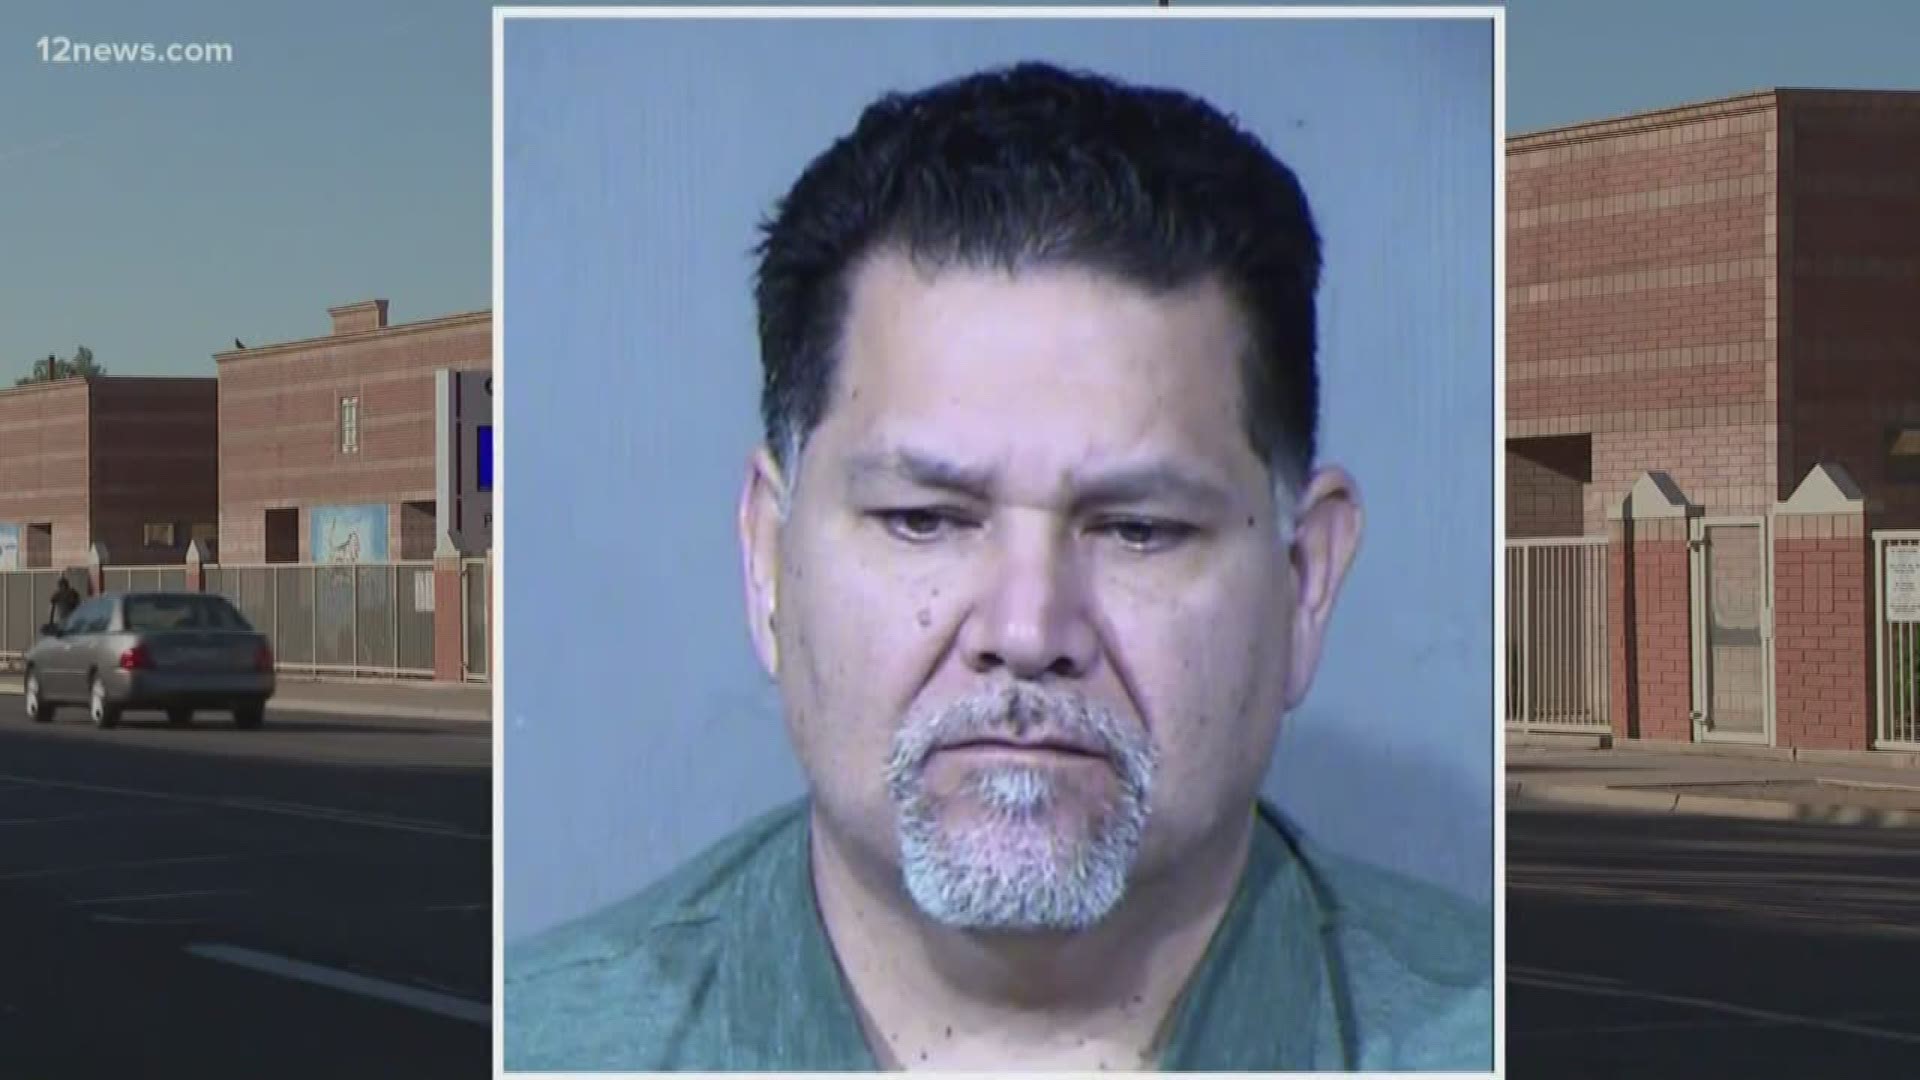 Two of the girls who came forward with the allegations against Manuel Gavina reported the inappropriate touching to school officials before he was arrested.